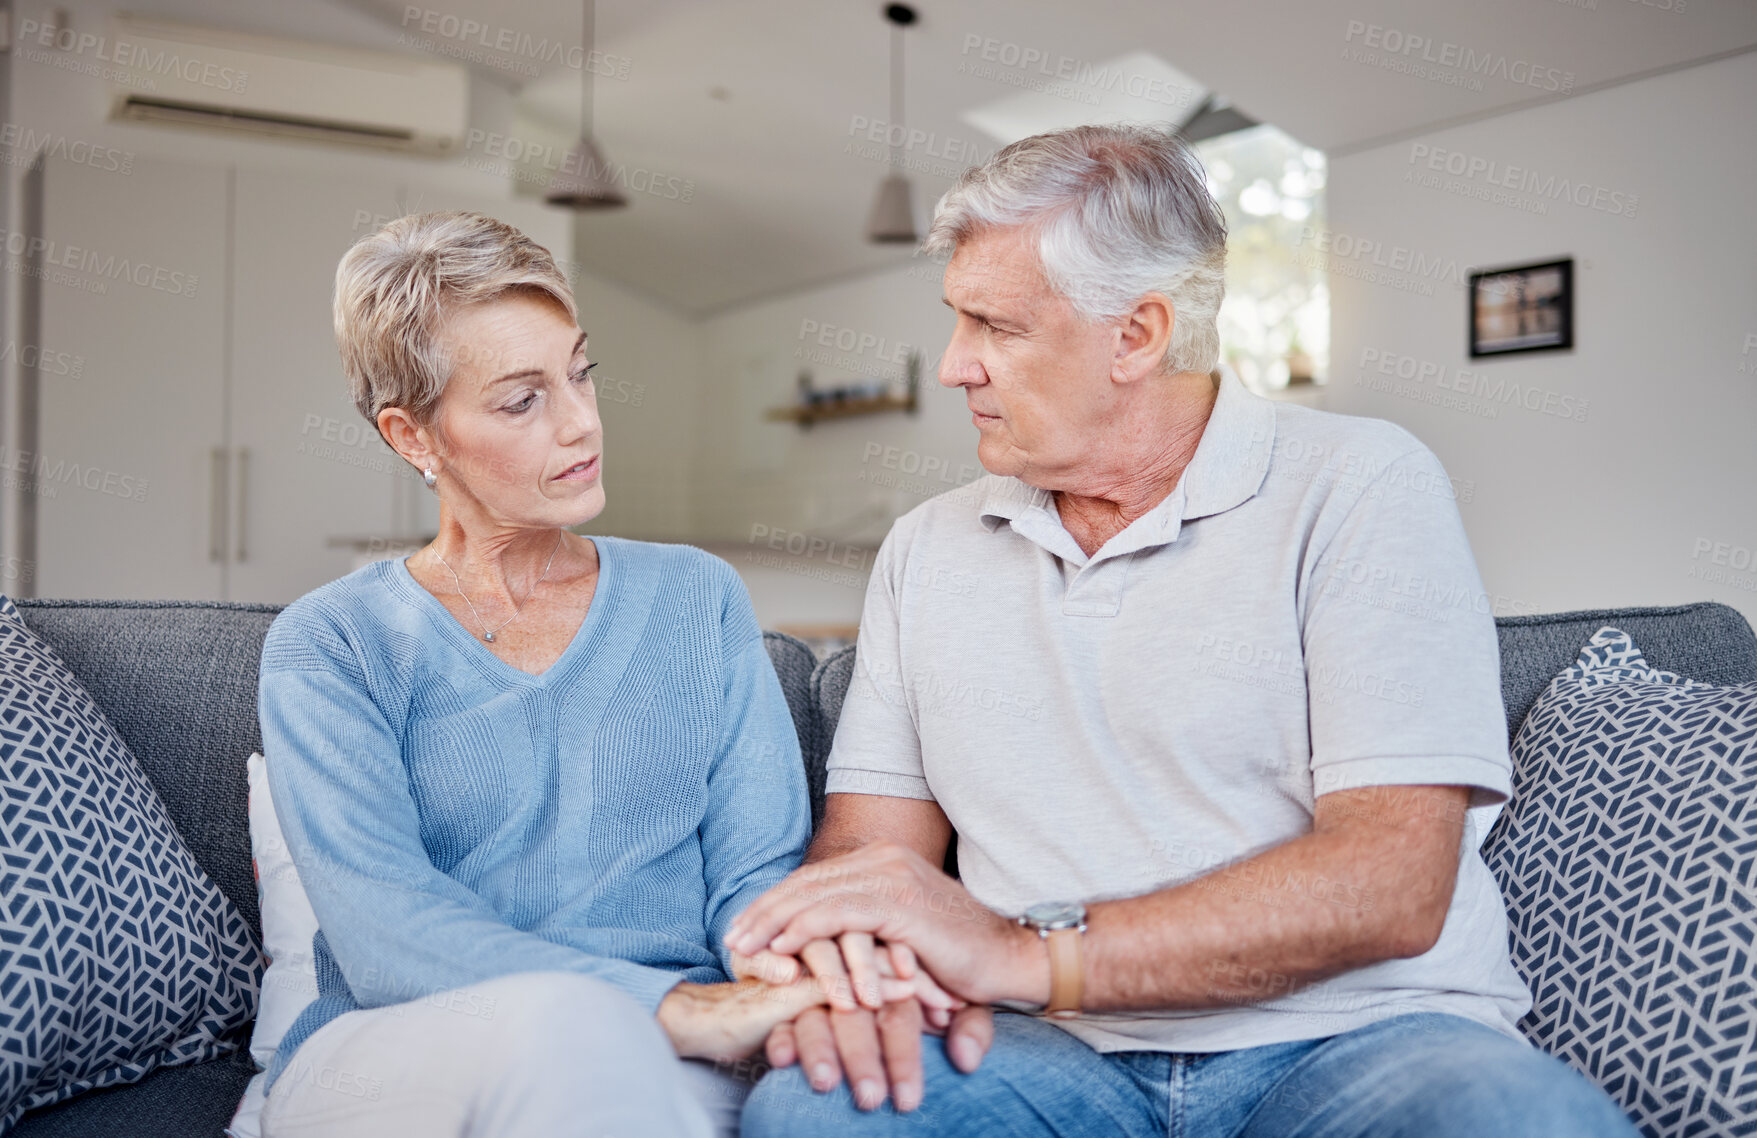 Buy stock photo Elderly couple, holding hands and living room of people with support from sad news at home. Senior, retirement and elderly care kindness showing trust, love and marriage care in a family house